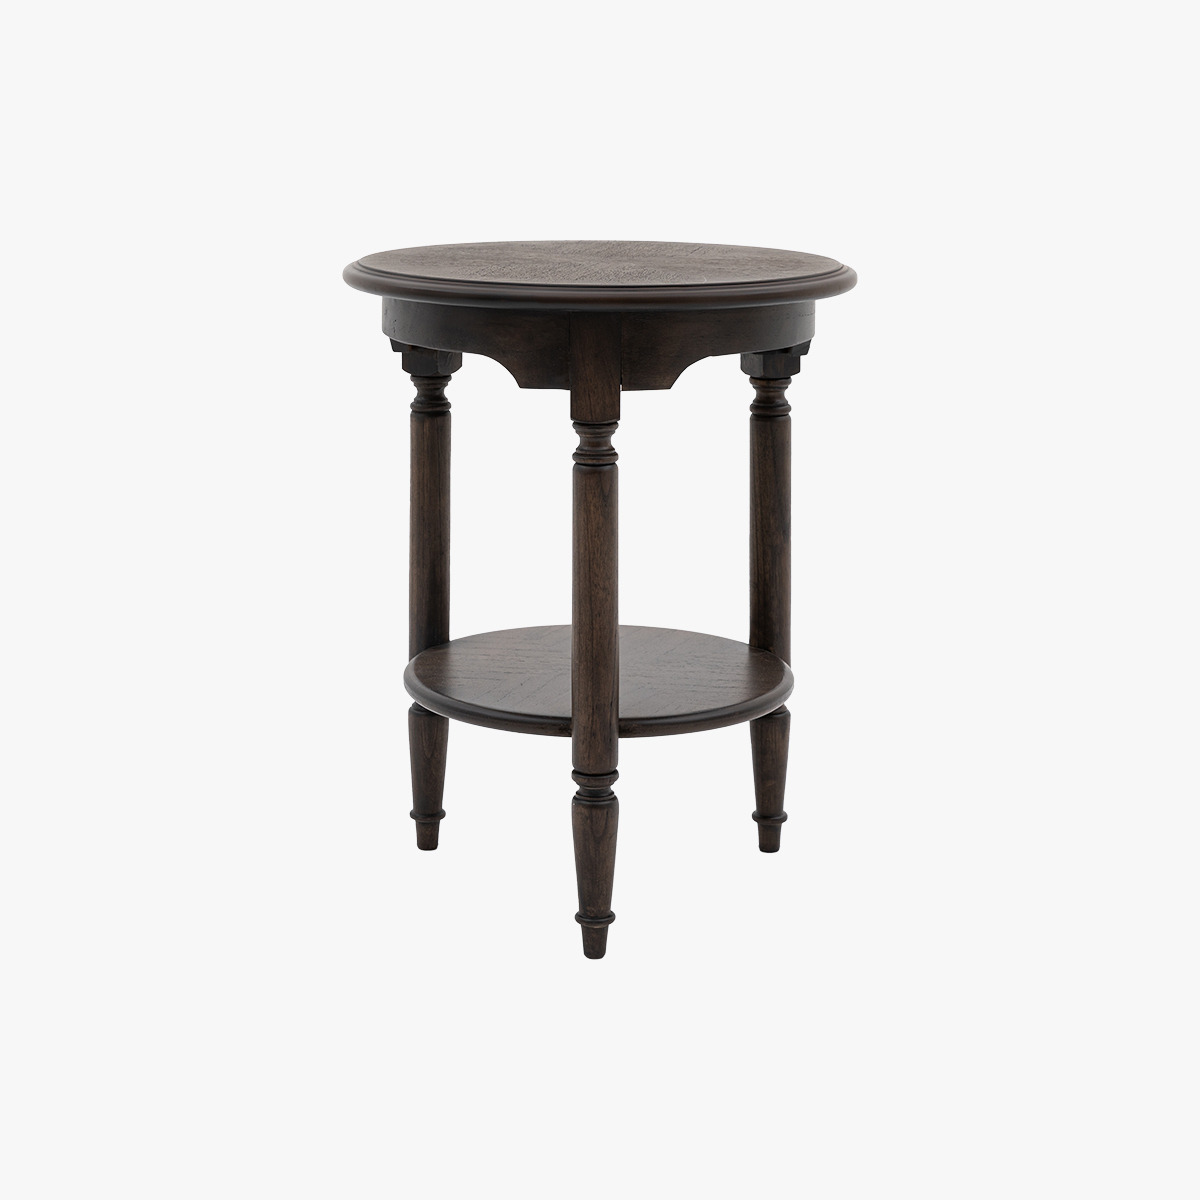 Chateau Side Table in Coffee